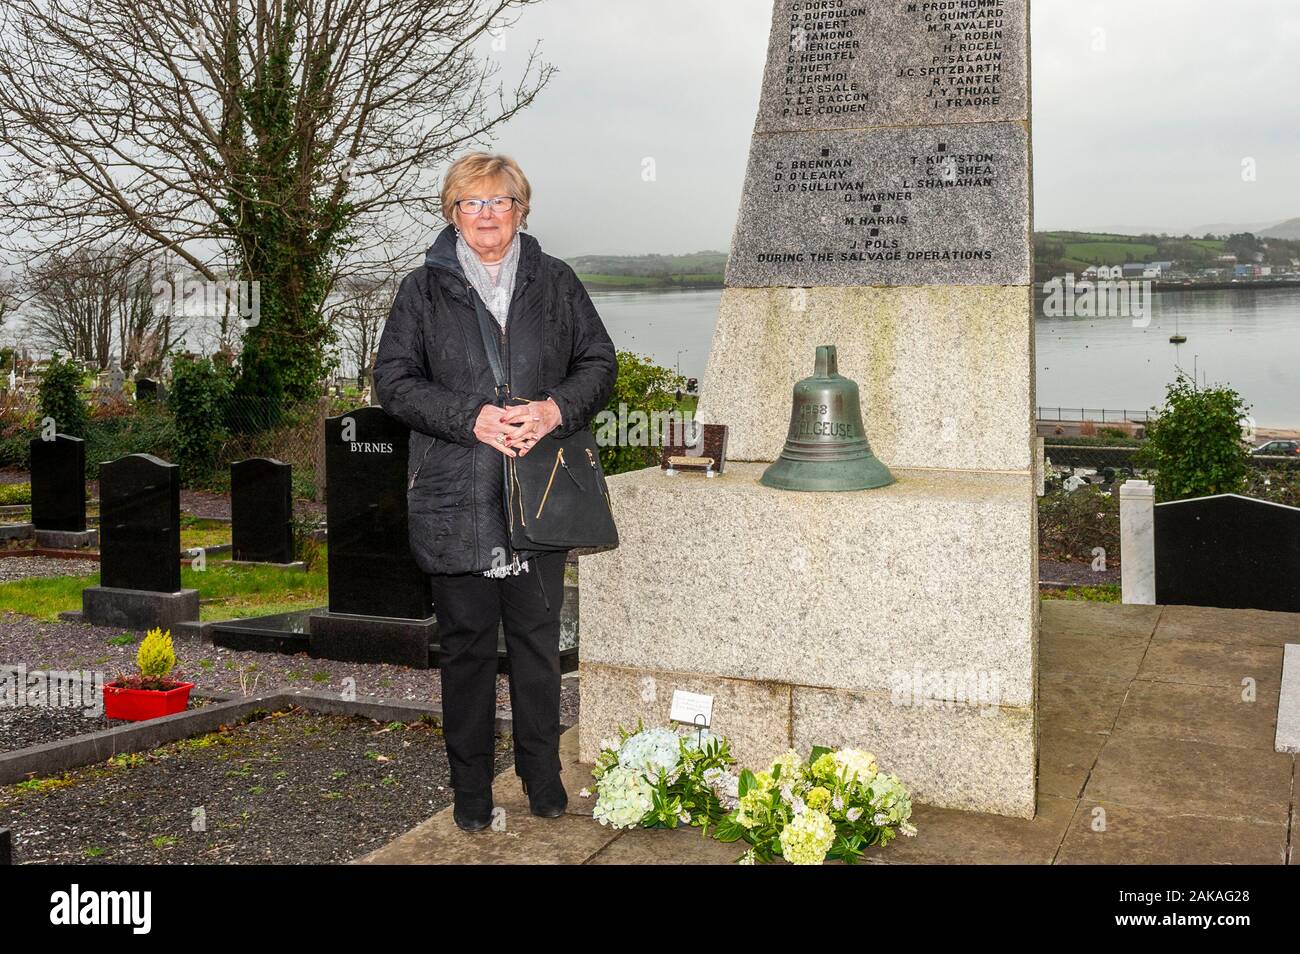 Bantry, West Cork, Ireland. 8th Jan, 2020. Today marks the 41st anniversary of the Whiddy Island disaster when the oil tanker Betelgeuse split in two and exploded causing the death of 50 workers in 1979.  Mary Doyle (Kingston) of Goleen lost her husband, Tim, on the night of the tragedy and came to the memorial today to lay wreaths.  it comes as Mary's son, Michael, who is a maritime lawyer, is in Dublin today handing a letter to the Garda Chief Superintendant regarding legal action against the Irish Government for shortcomings in the aftermath of the disaster.  Credit: AG News/Alamy Live News Stock Photo